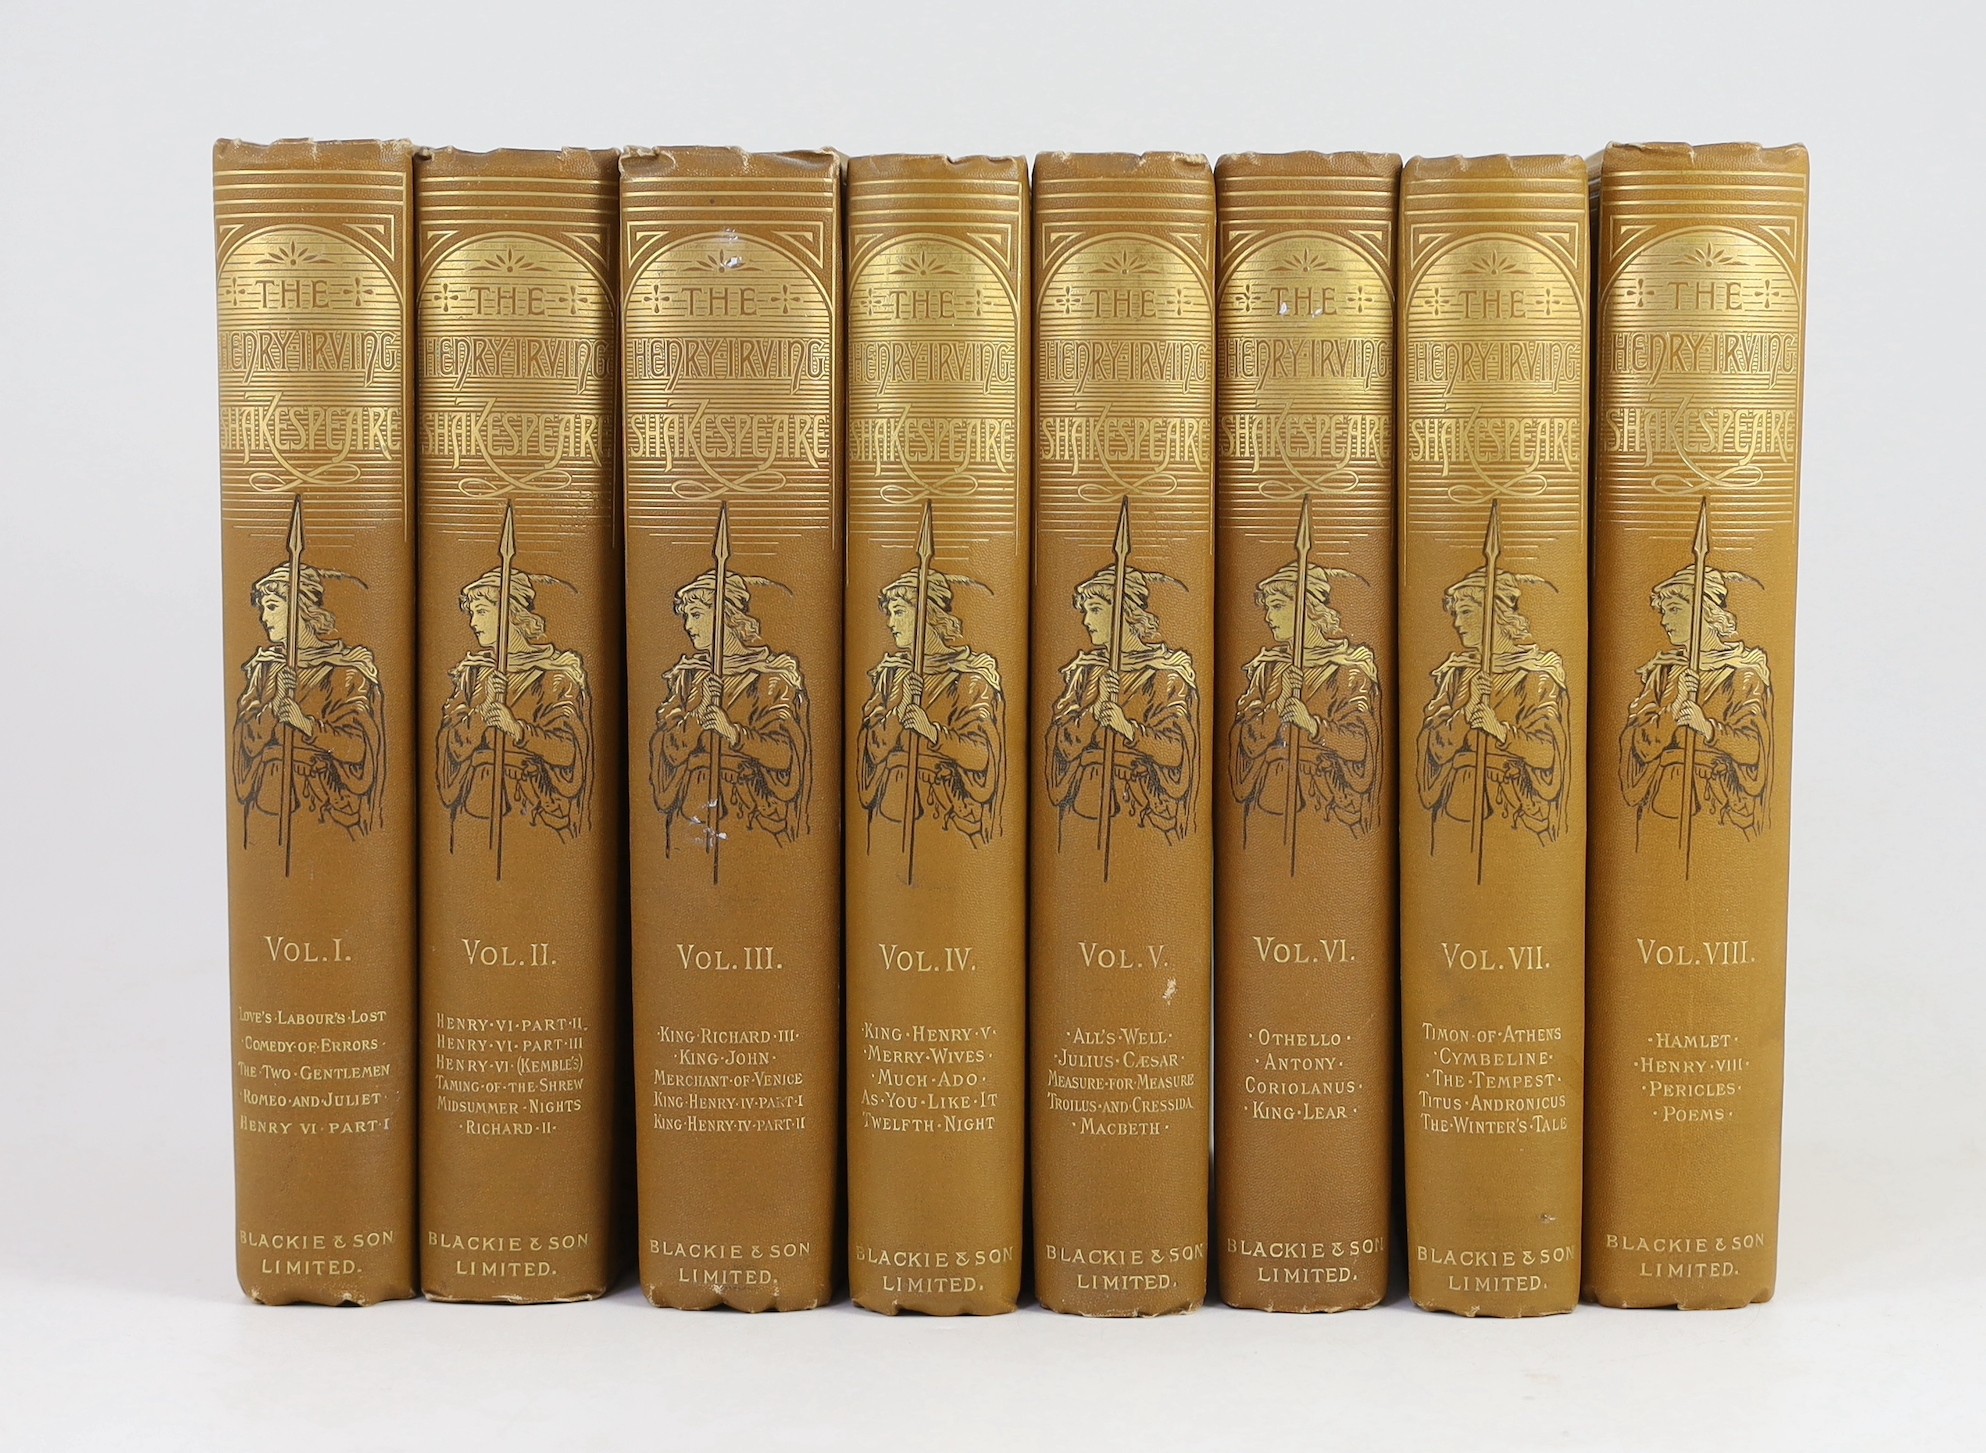 Shakespeare, William - The Henry Irving Shakespeare, illustrated by Gordon Browne, 8 vols, 8vo, original cloth gilt, Blackie & Son, Limited, London, 1893